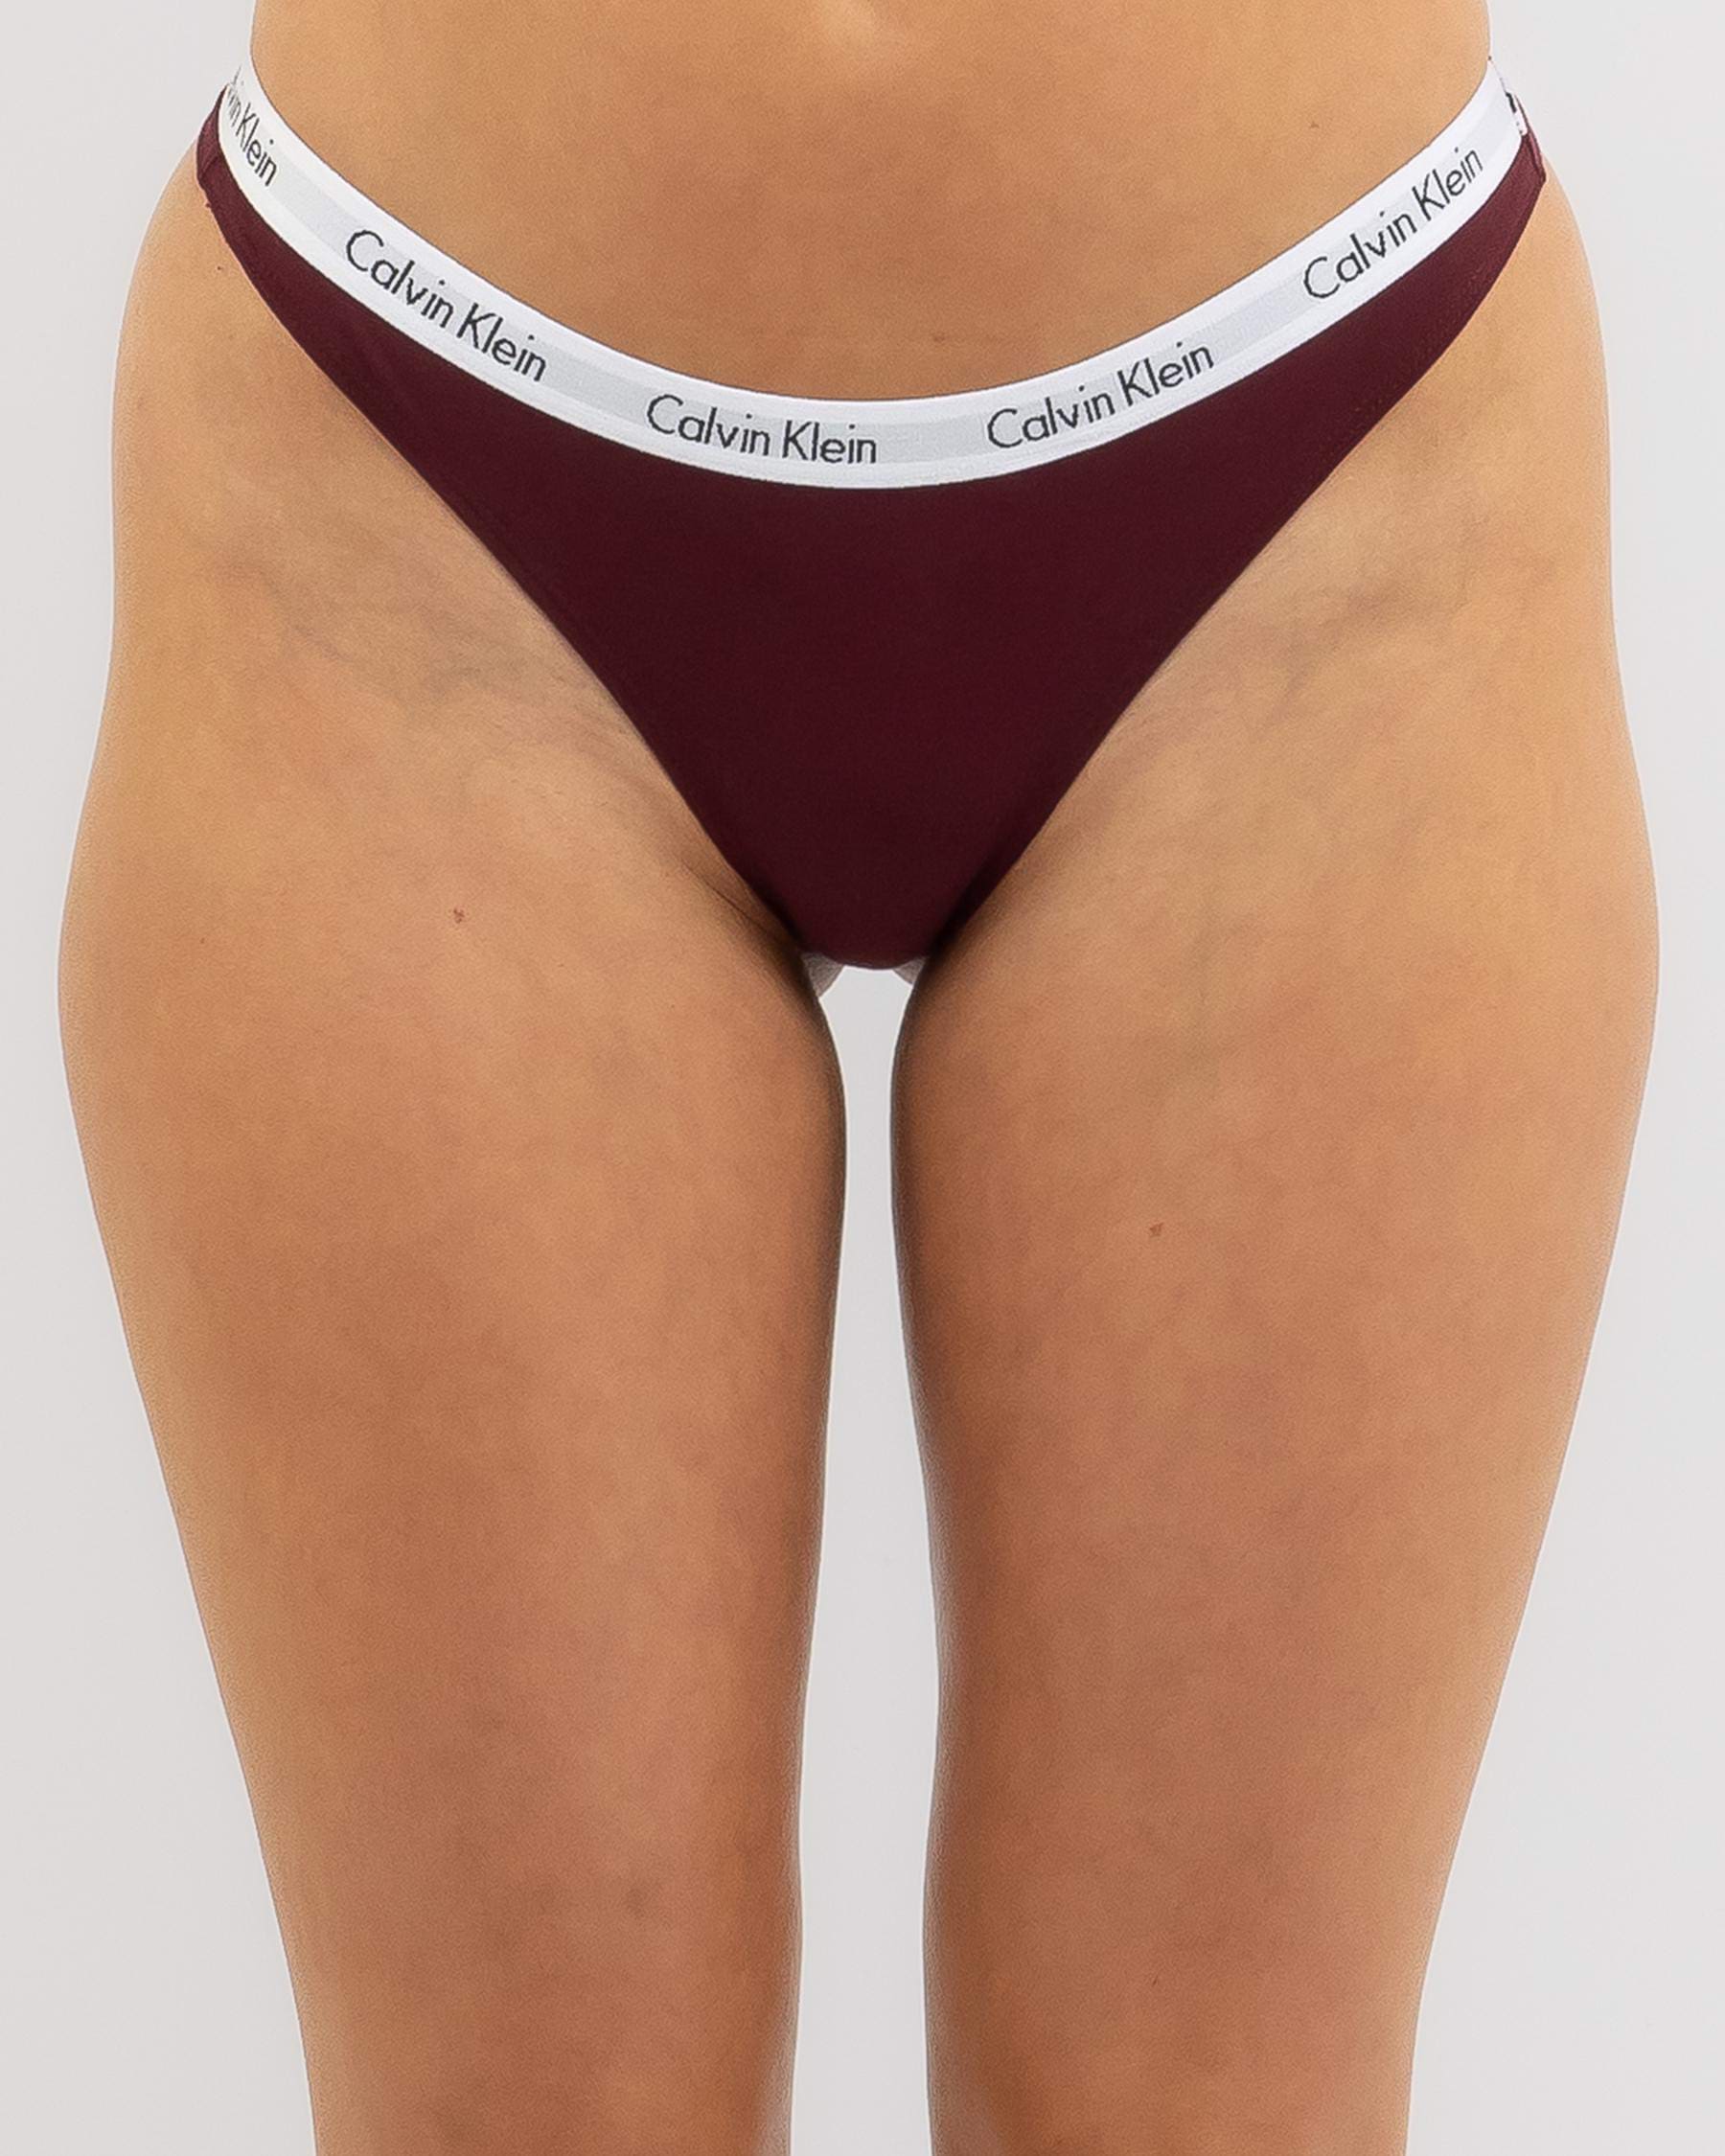 Calvin Klein Carousel Thong In Deep Rouge - FREE* Shipping & Easy Returns -  City Beach United States